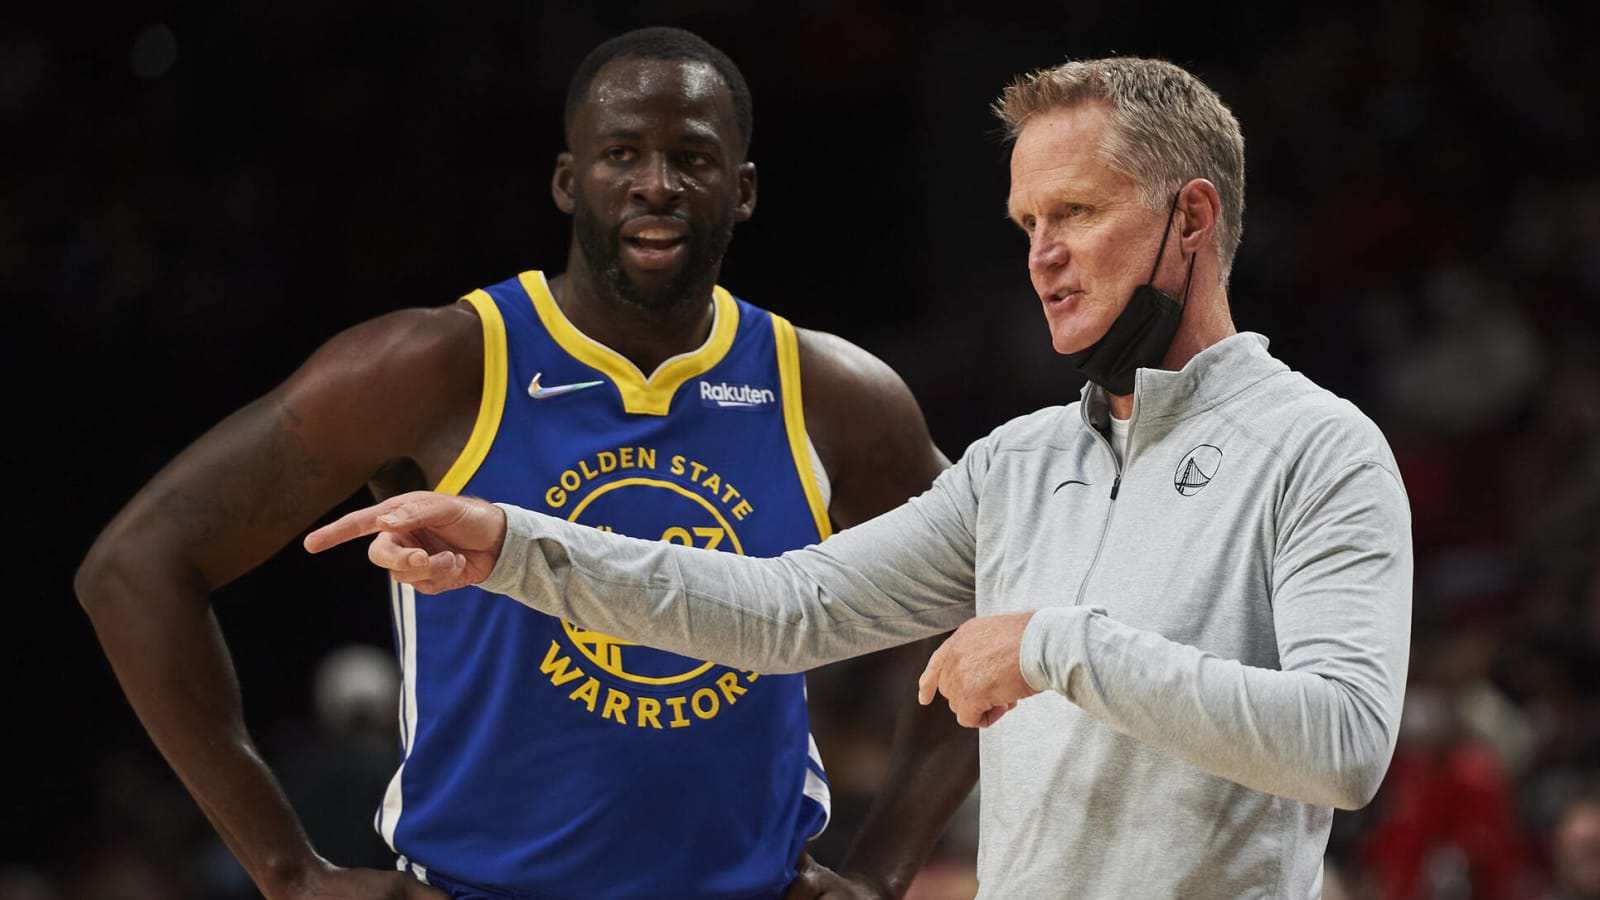 Steve Kerr: Draymond Green will be on minutes restriction upon return